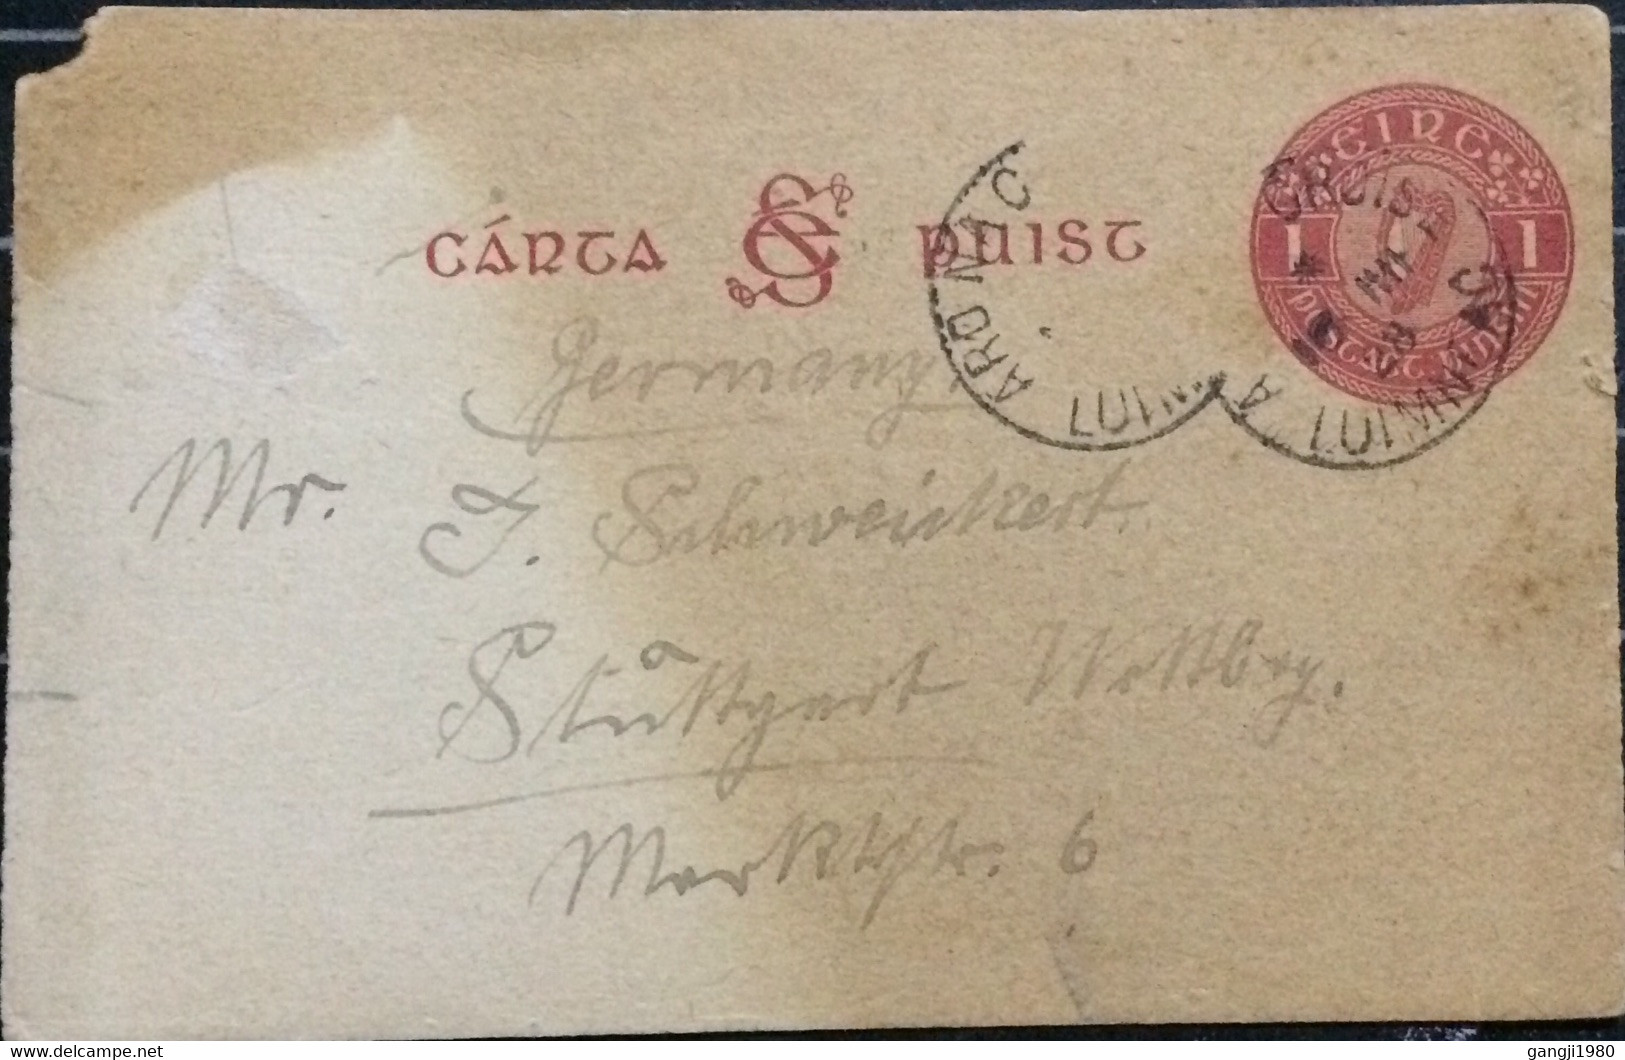 IRELAND 1928, STATIONERY CARD USED, MUSIC INSTRUMENT, ARO MACROSE LUIMNEACH CITY CANCEL - Lettres & Documents